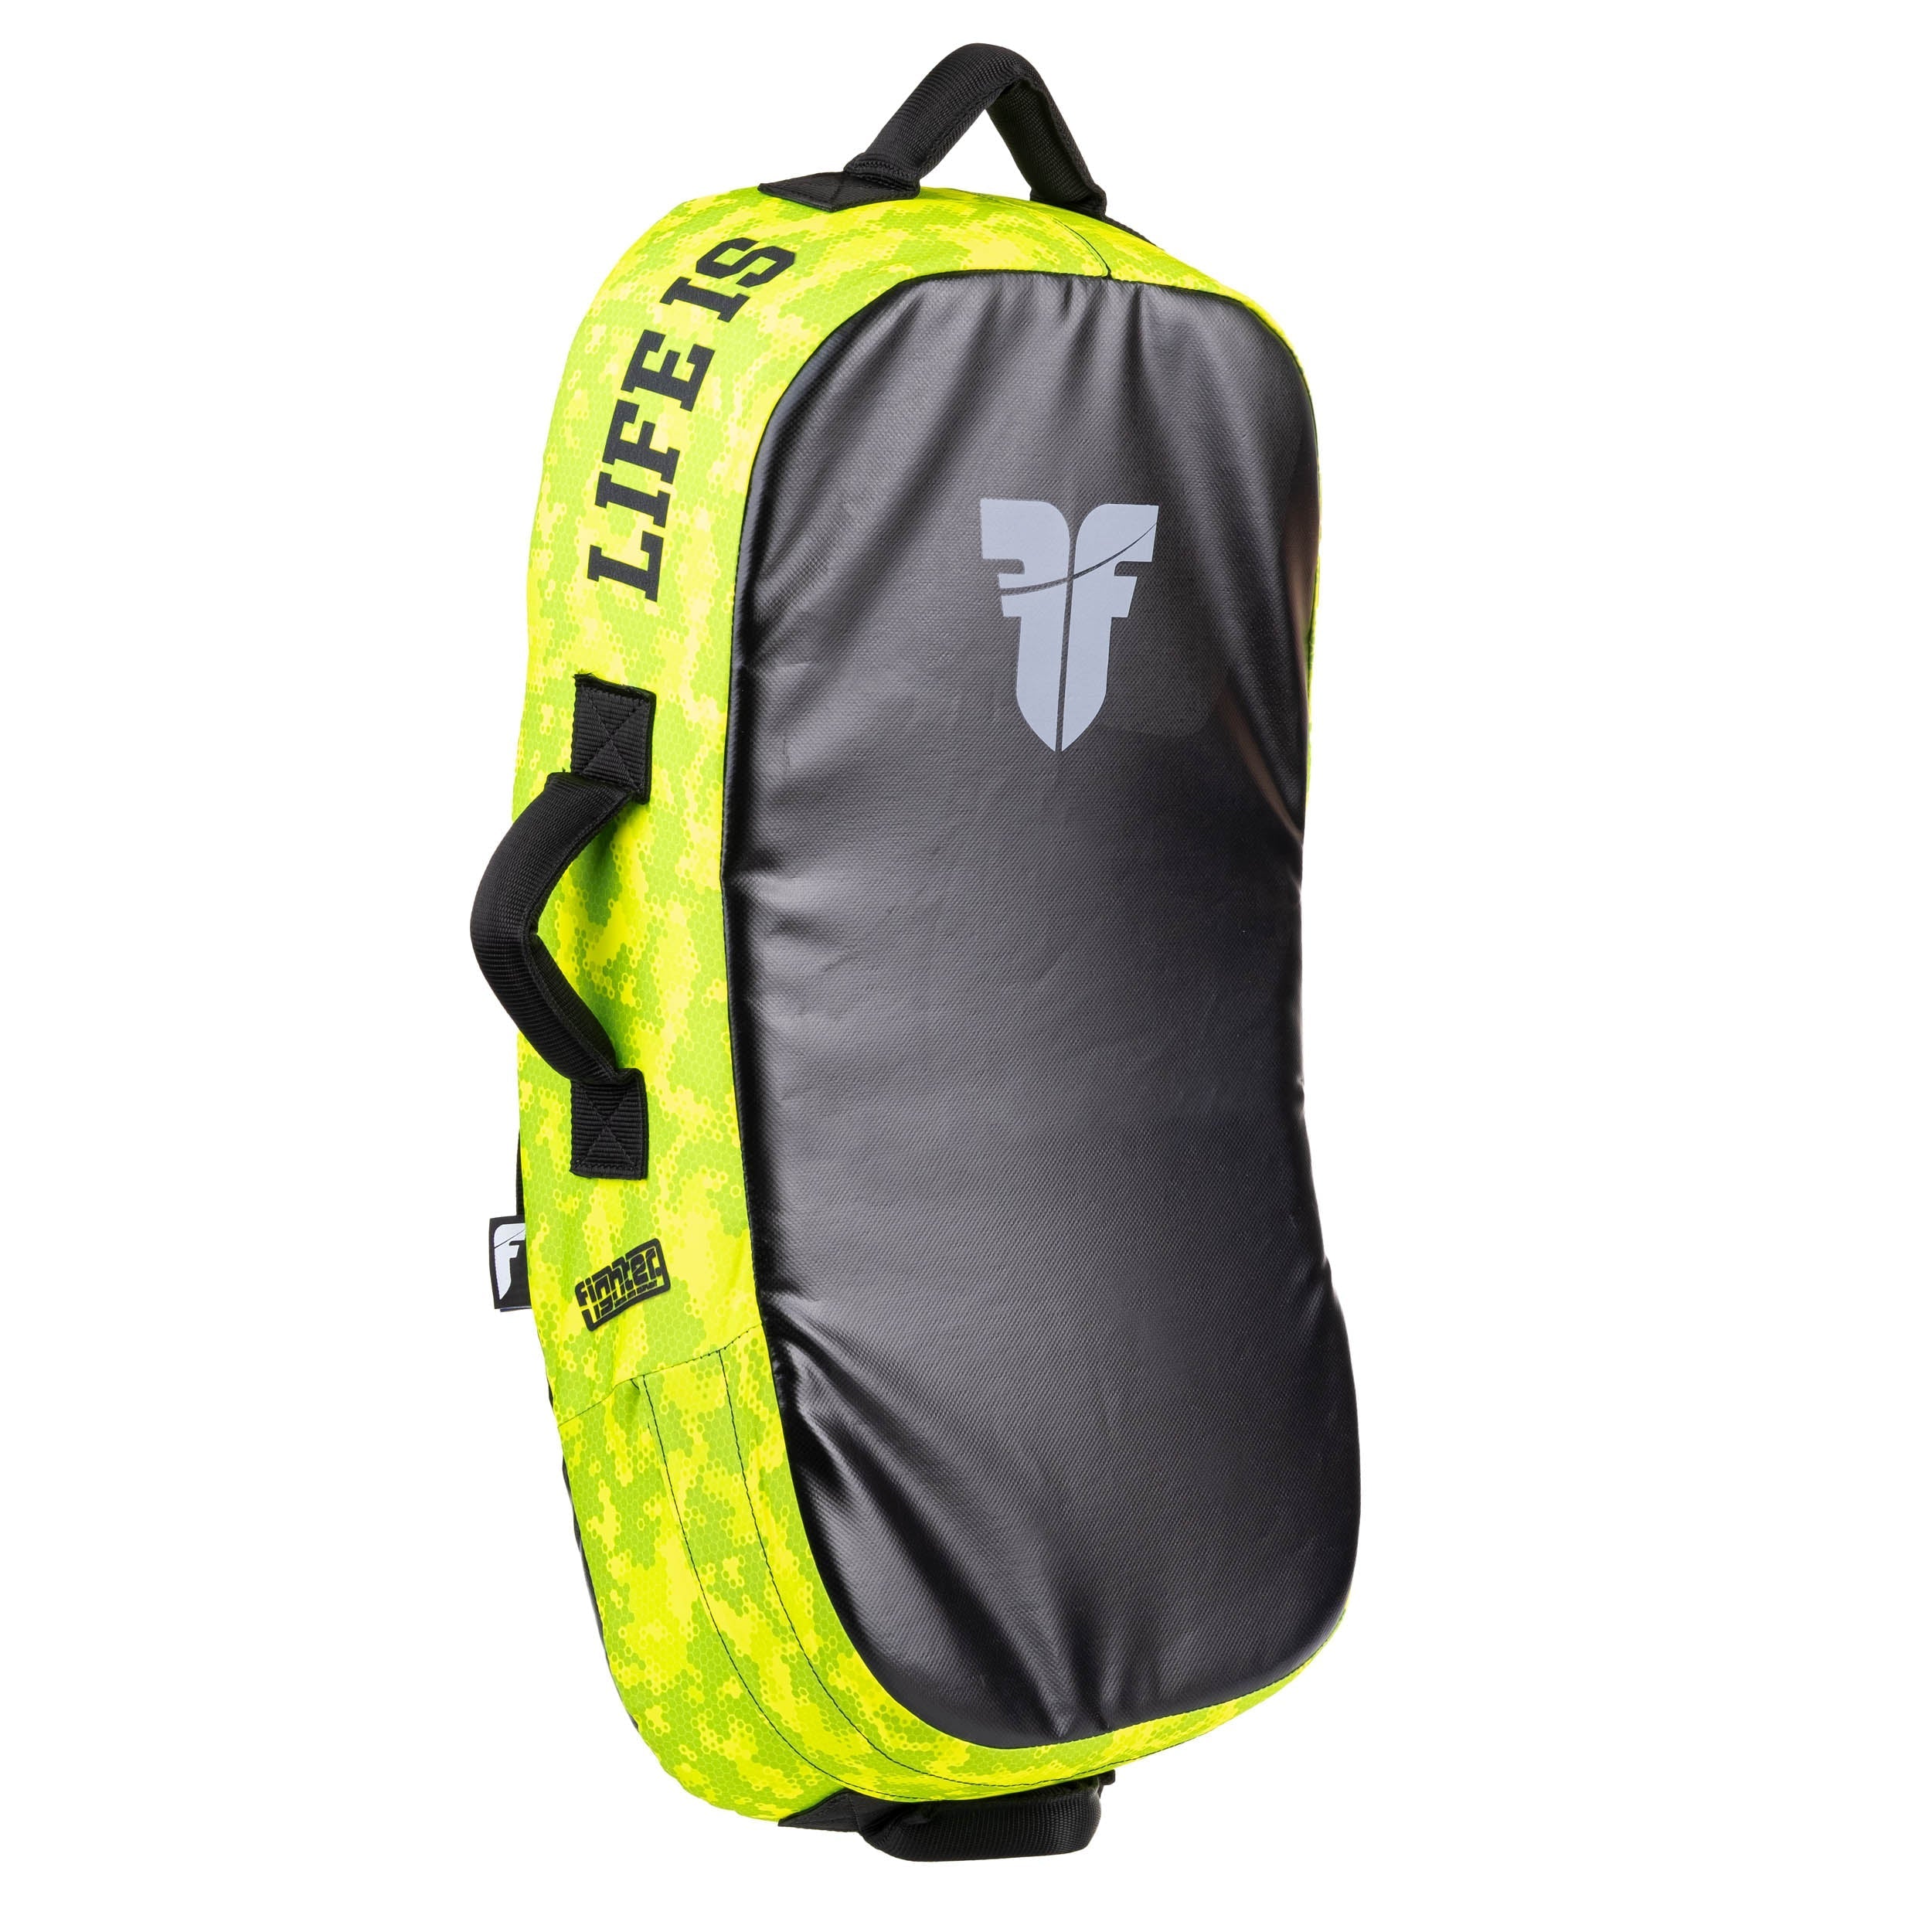 Fighter Kicking Shield - MULTI GRIP - Life is a Fight - Neon Camo, FFKSH-37